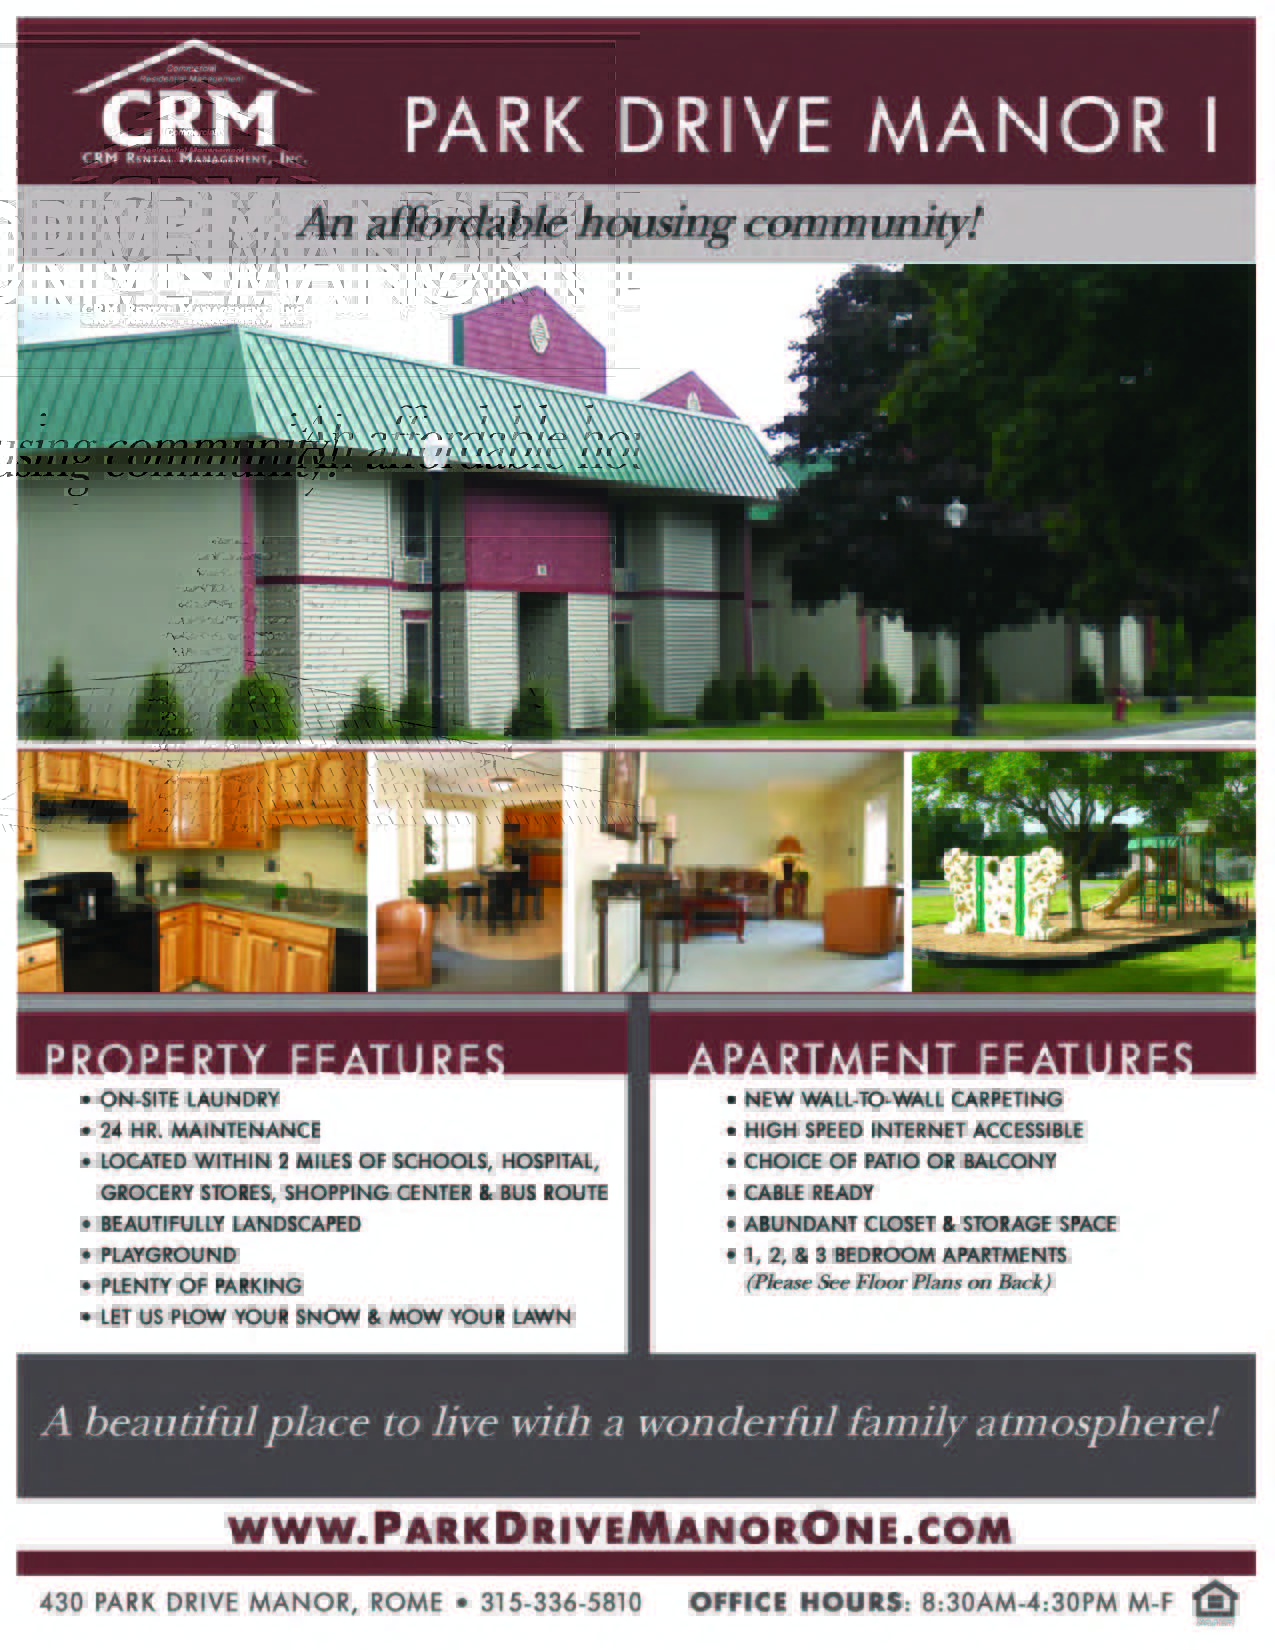 Park Drive Manor 1 Brochure Page 1 of 2